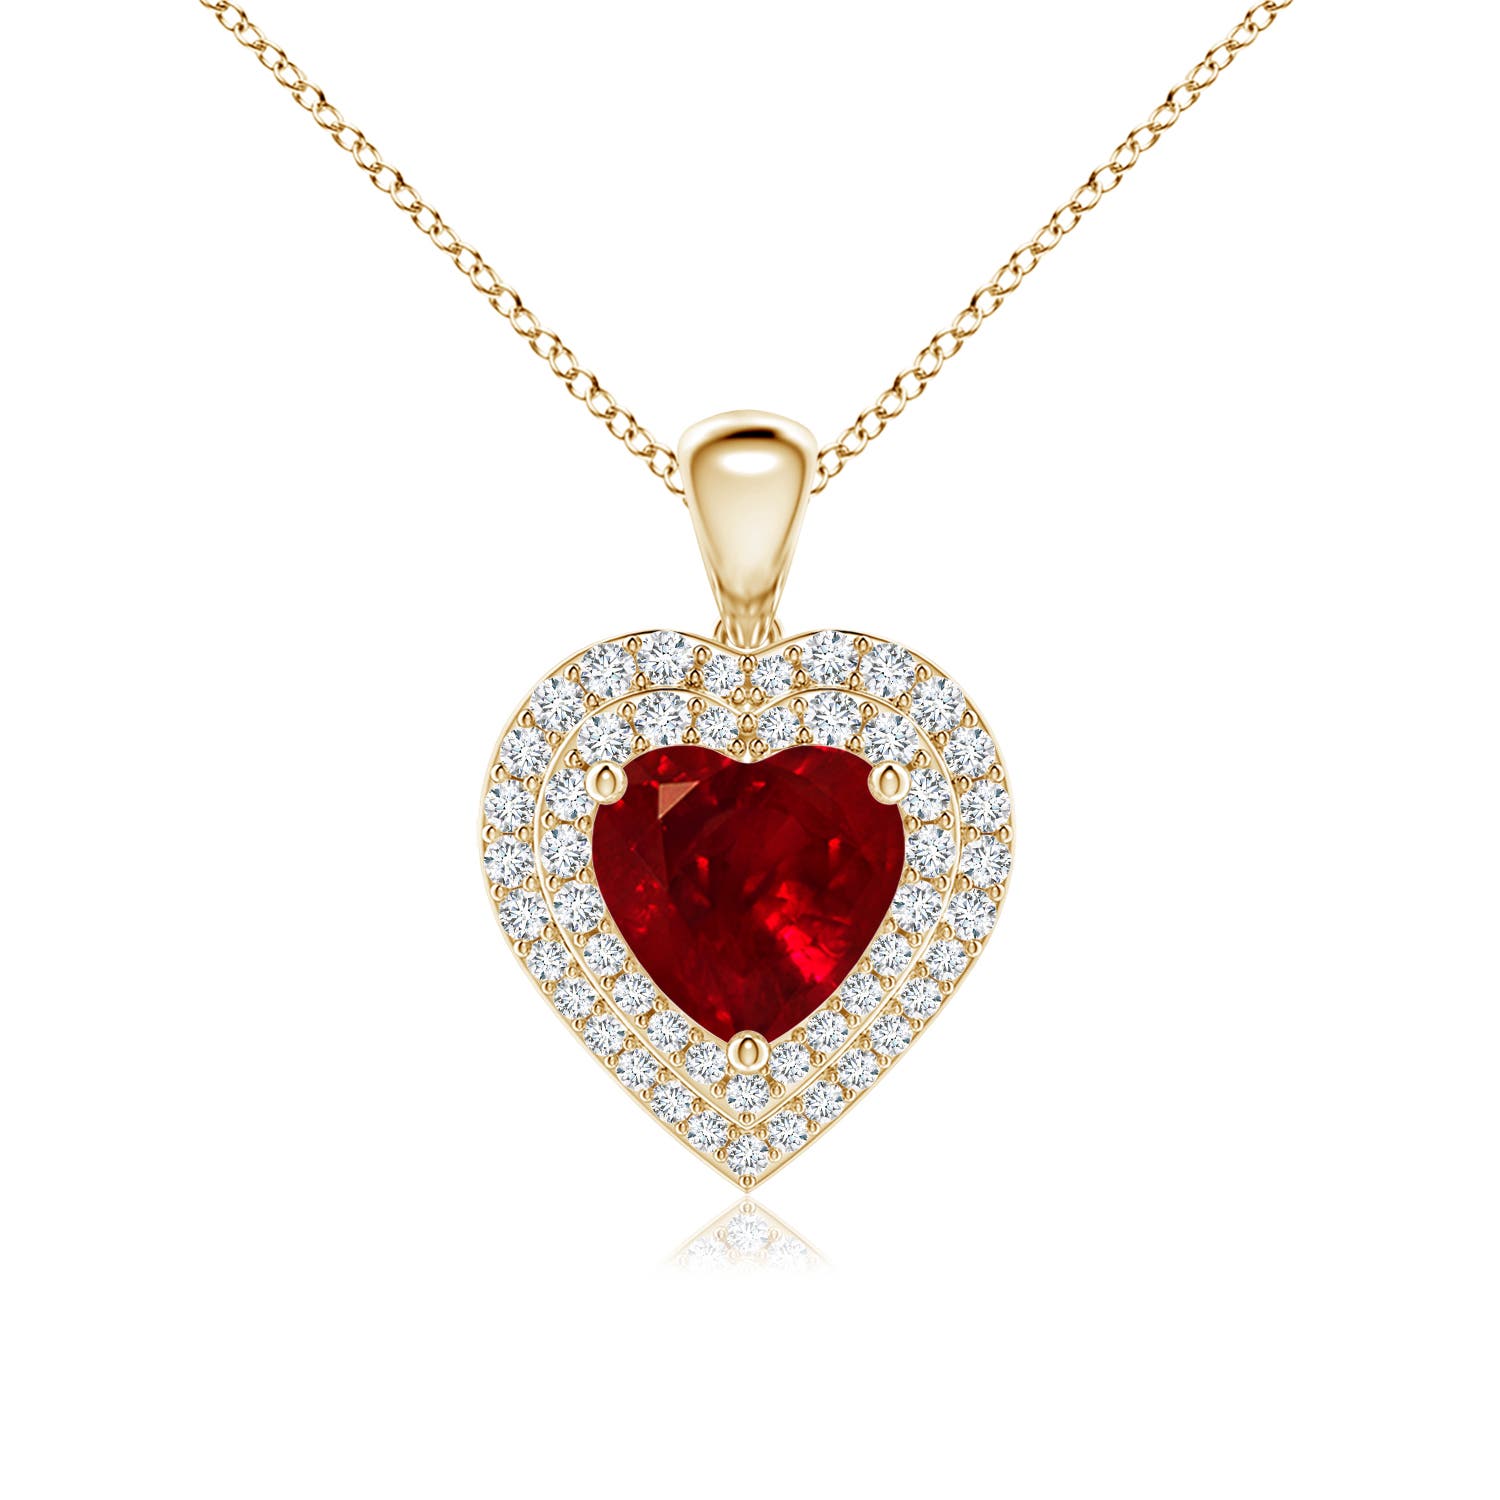 AAAA - Ruby / 2.08 CT / 14 KT Yellow Gold